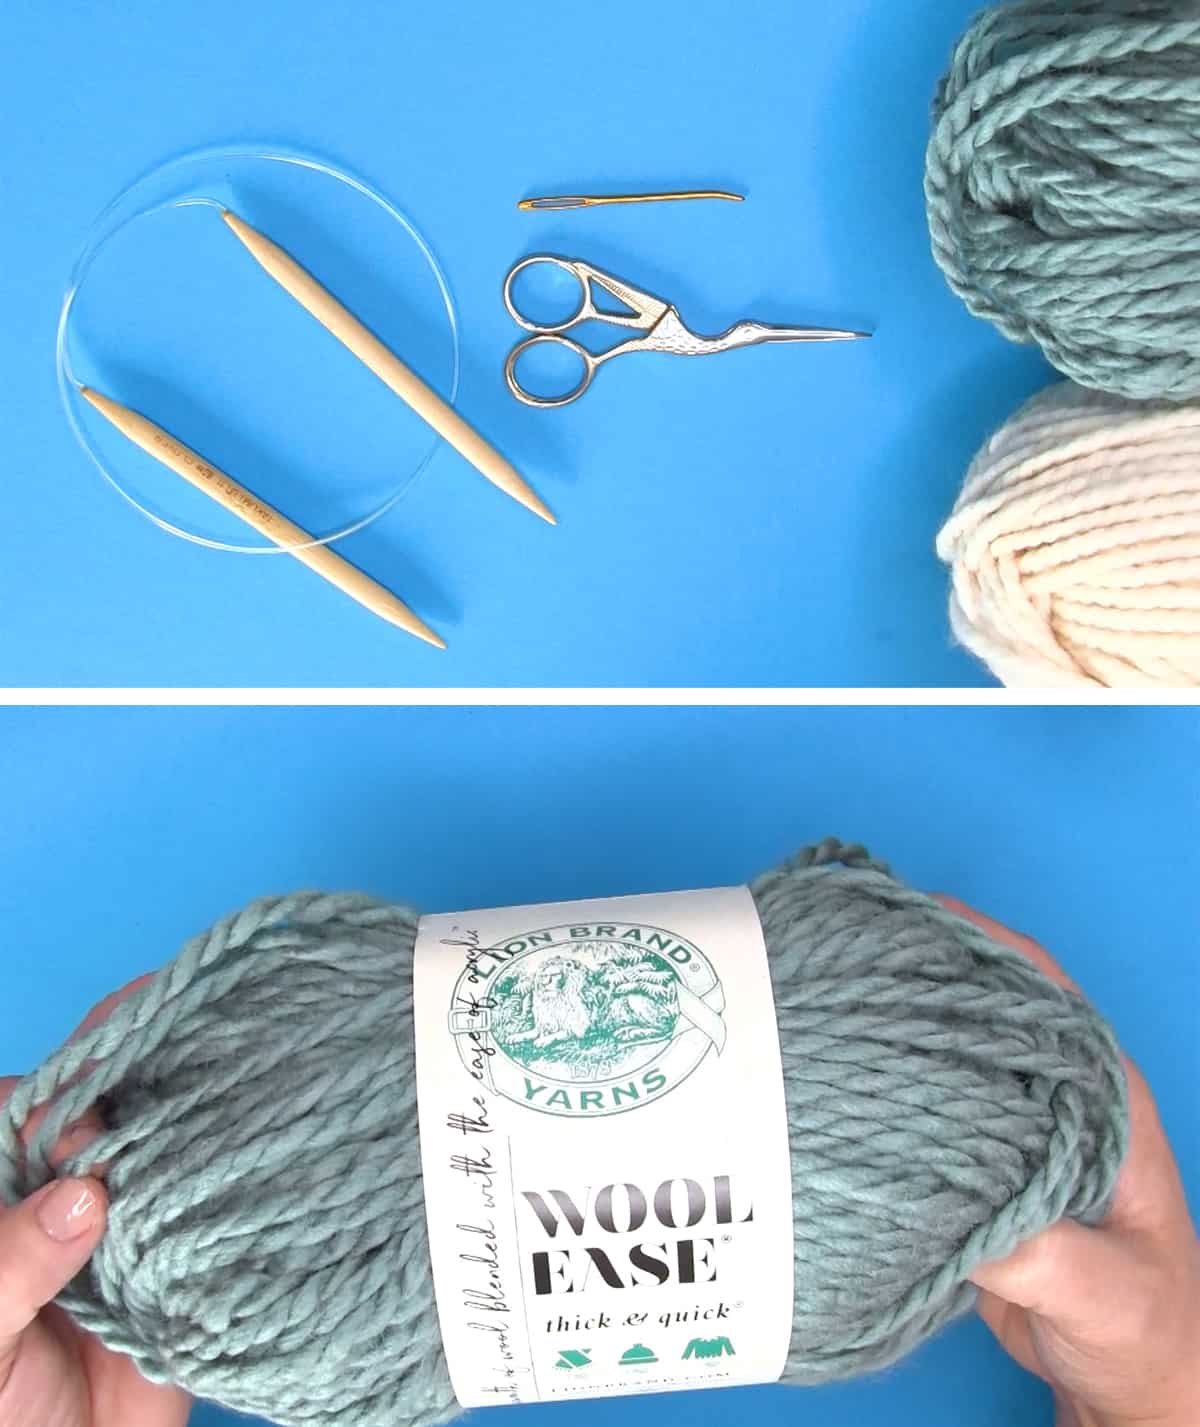 Knitting supplies of circular knitting needles, scissors, a tapestry needle, and Lion Brand Wool Ease yarn.